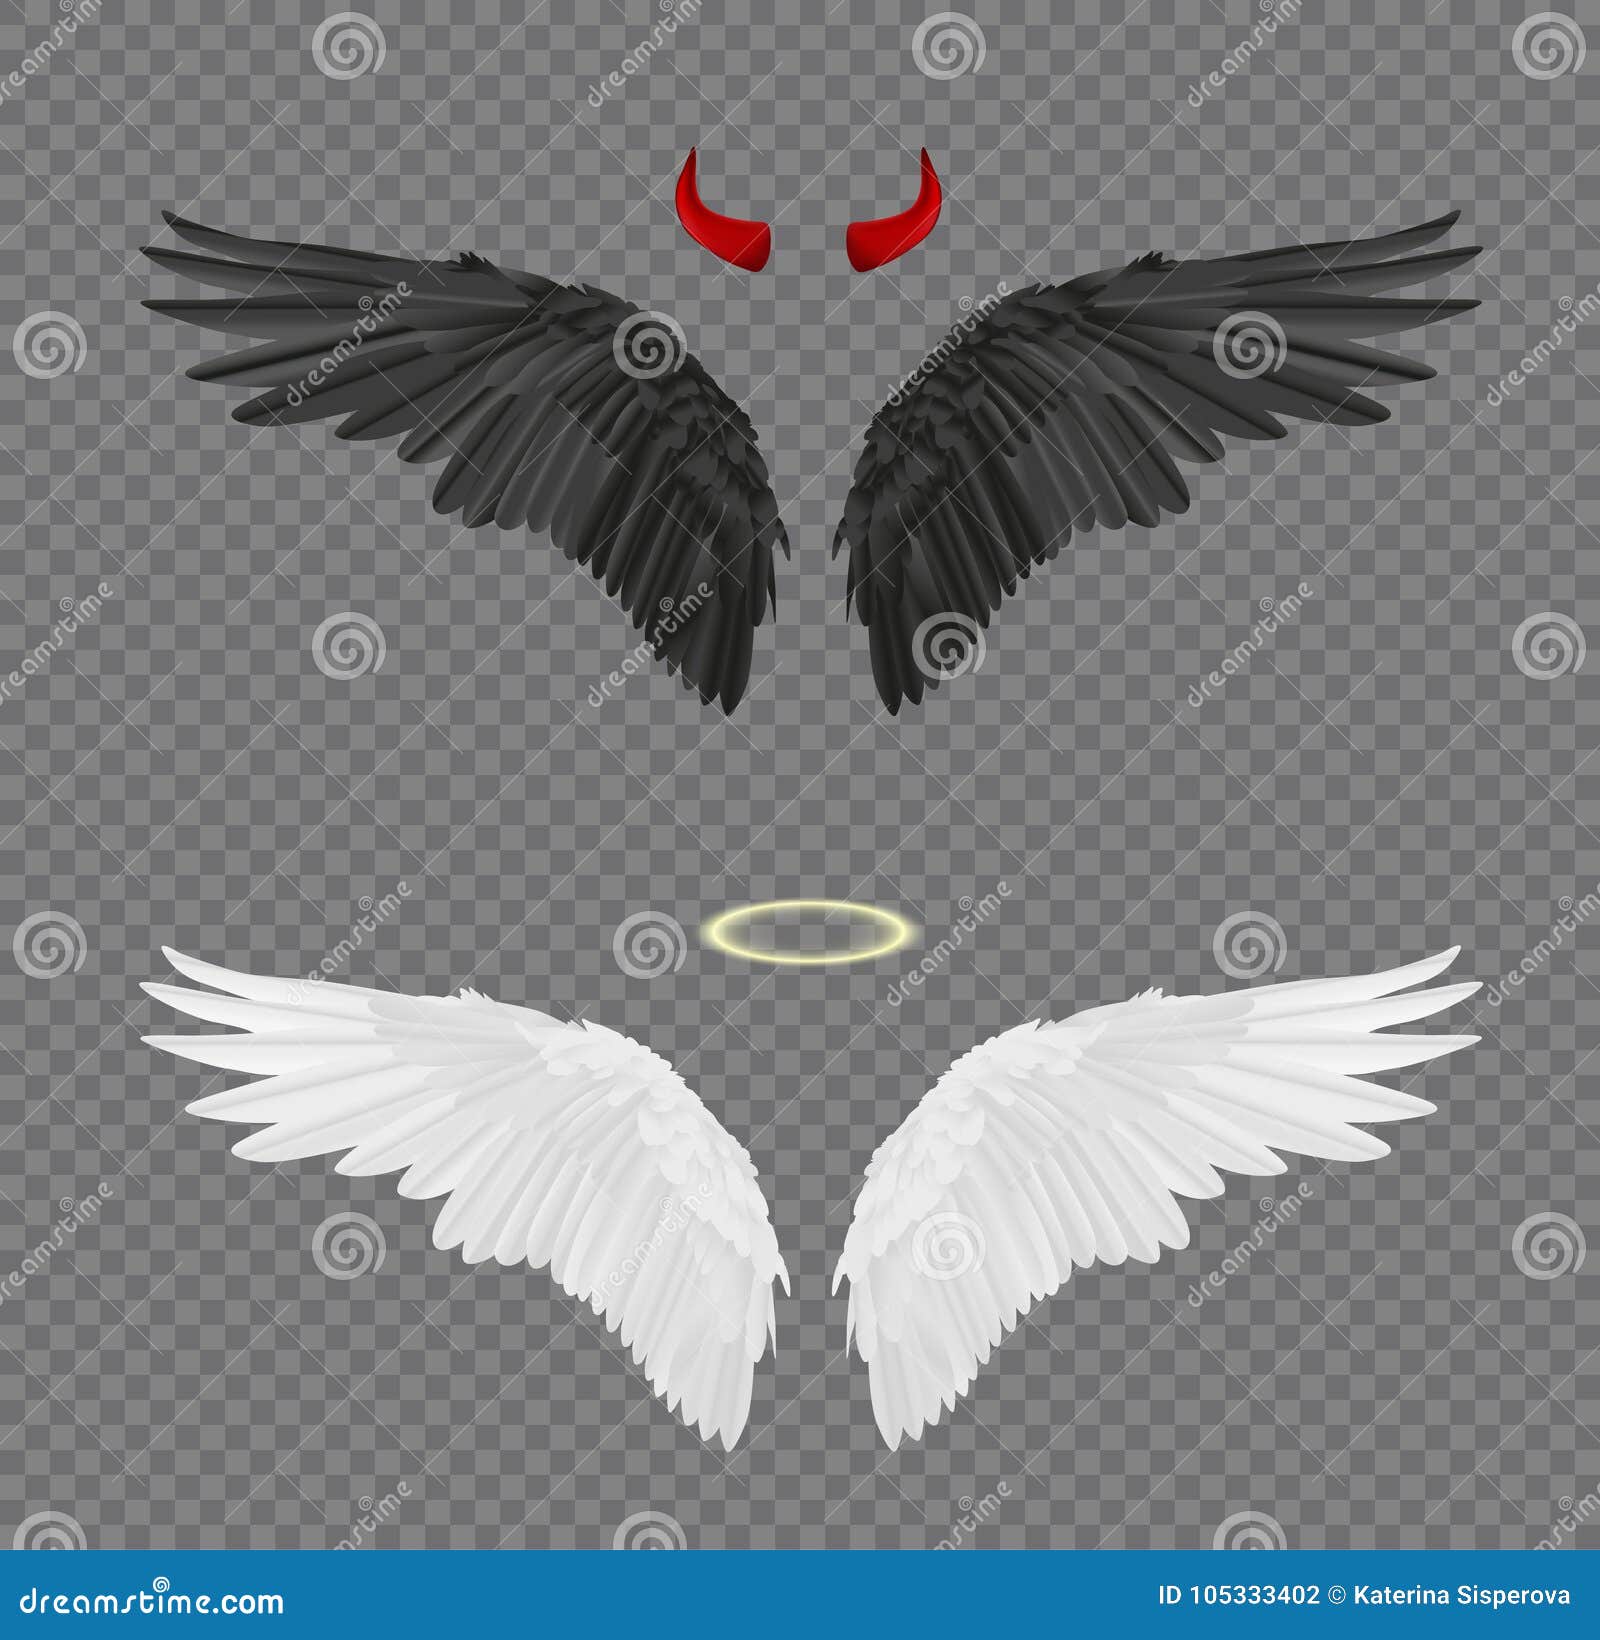 7,167 Angel Devil Tattoo Images, Stock Photos, 3D objects, & Vectors |  Shutterstock